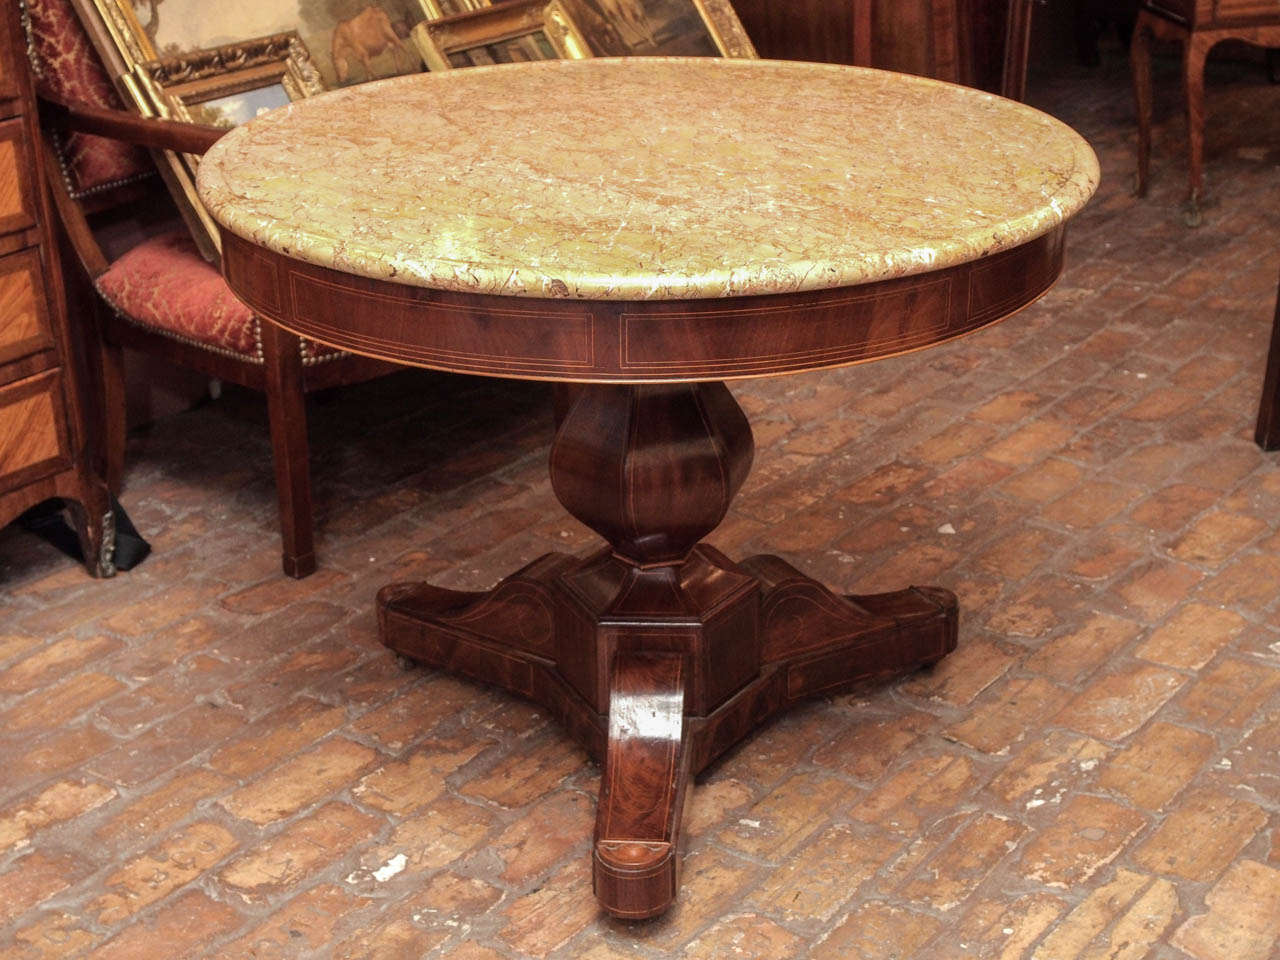 French Charles X period mahogany gueridon with satinwood inlay and unusual marble top, circa 1830.